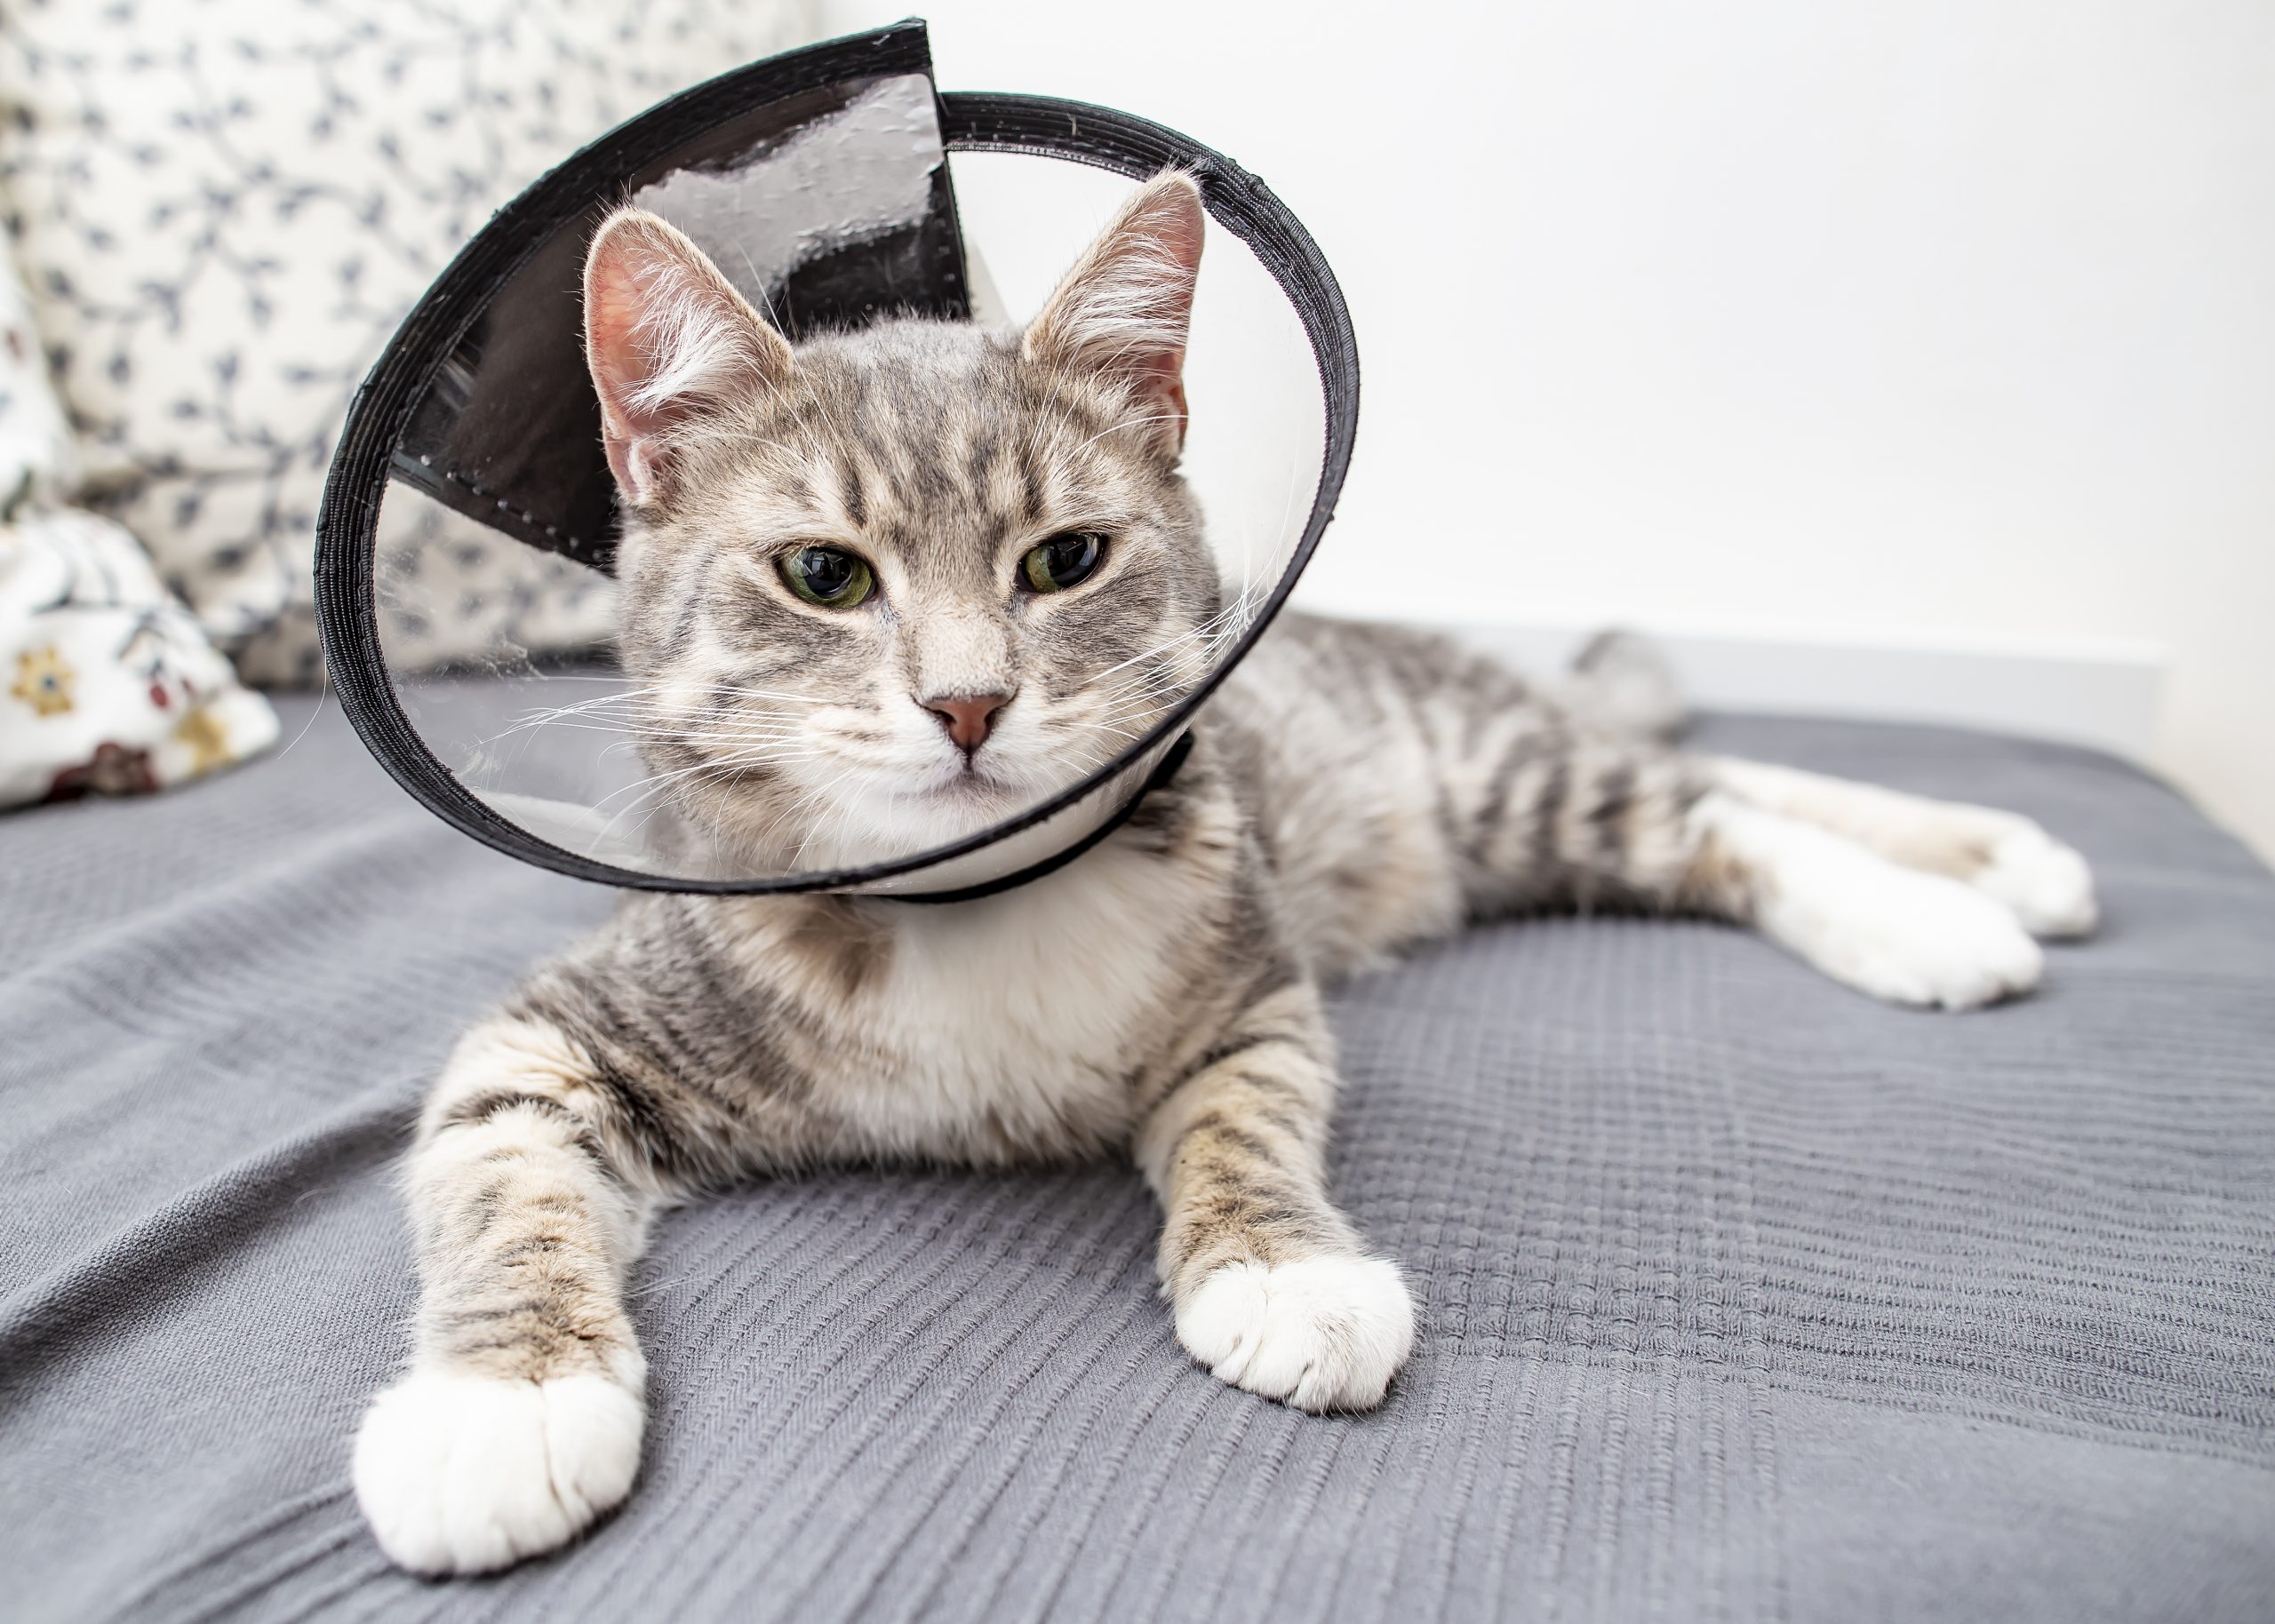 How much does it cost to neuter a cat?